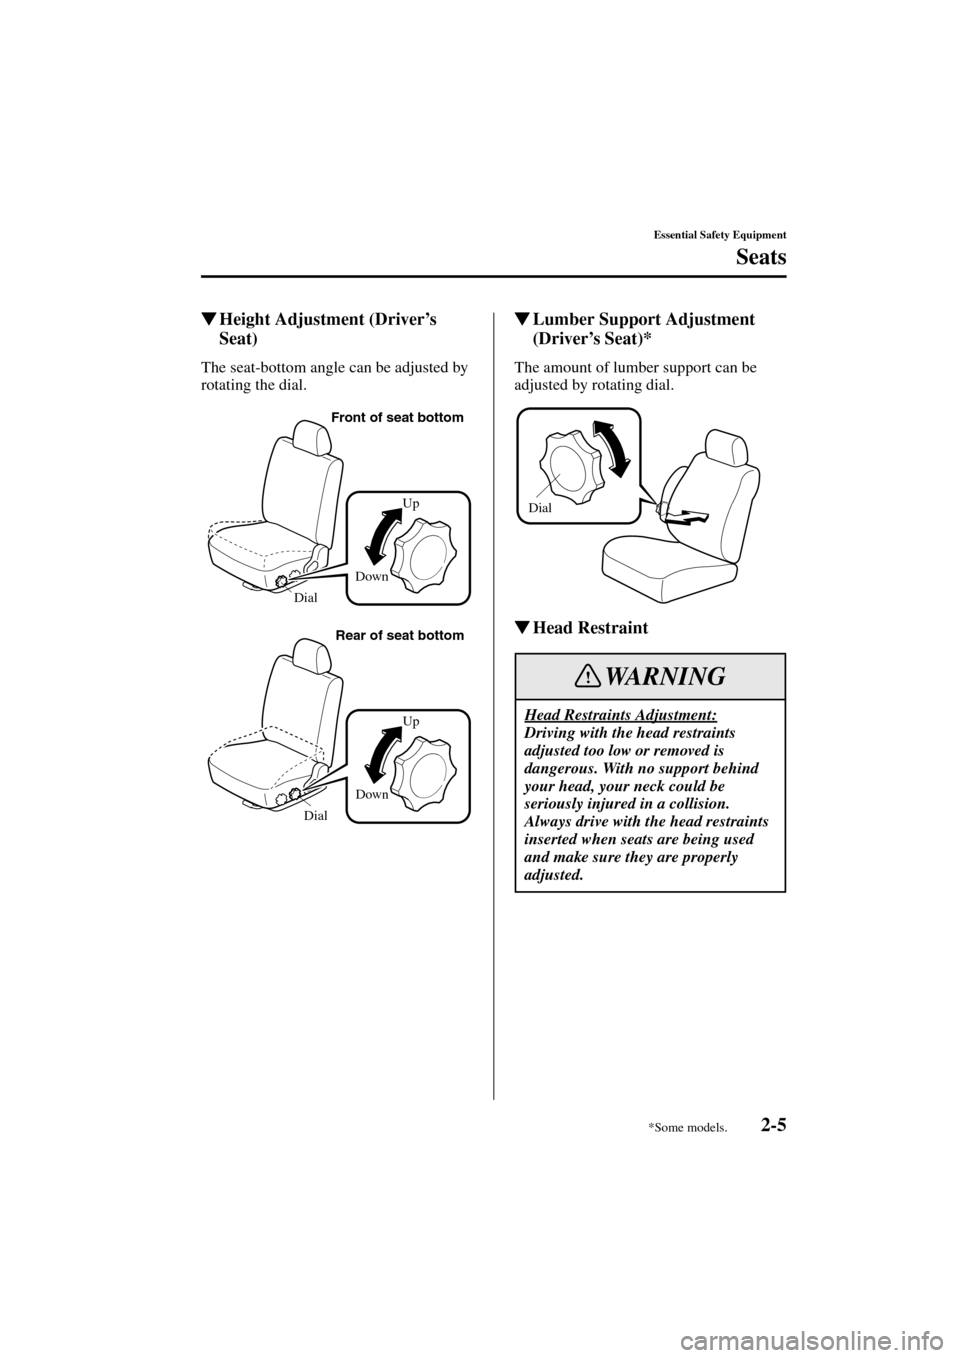 MAZDA MODEL MPV 2004  Owners Manual (in English) 2-5
Essential Safety Equipment
Seats
Form No. 8S06-EA-03H
Height Adjustment (Driver’s 
Seat)
The seat-bottom angle can be adjusted by 
rotating the dial.
Lumber Support Adjustment 
(Driver’s Sea